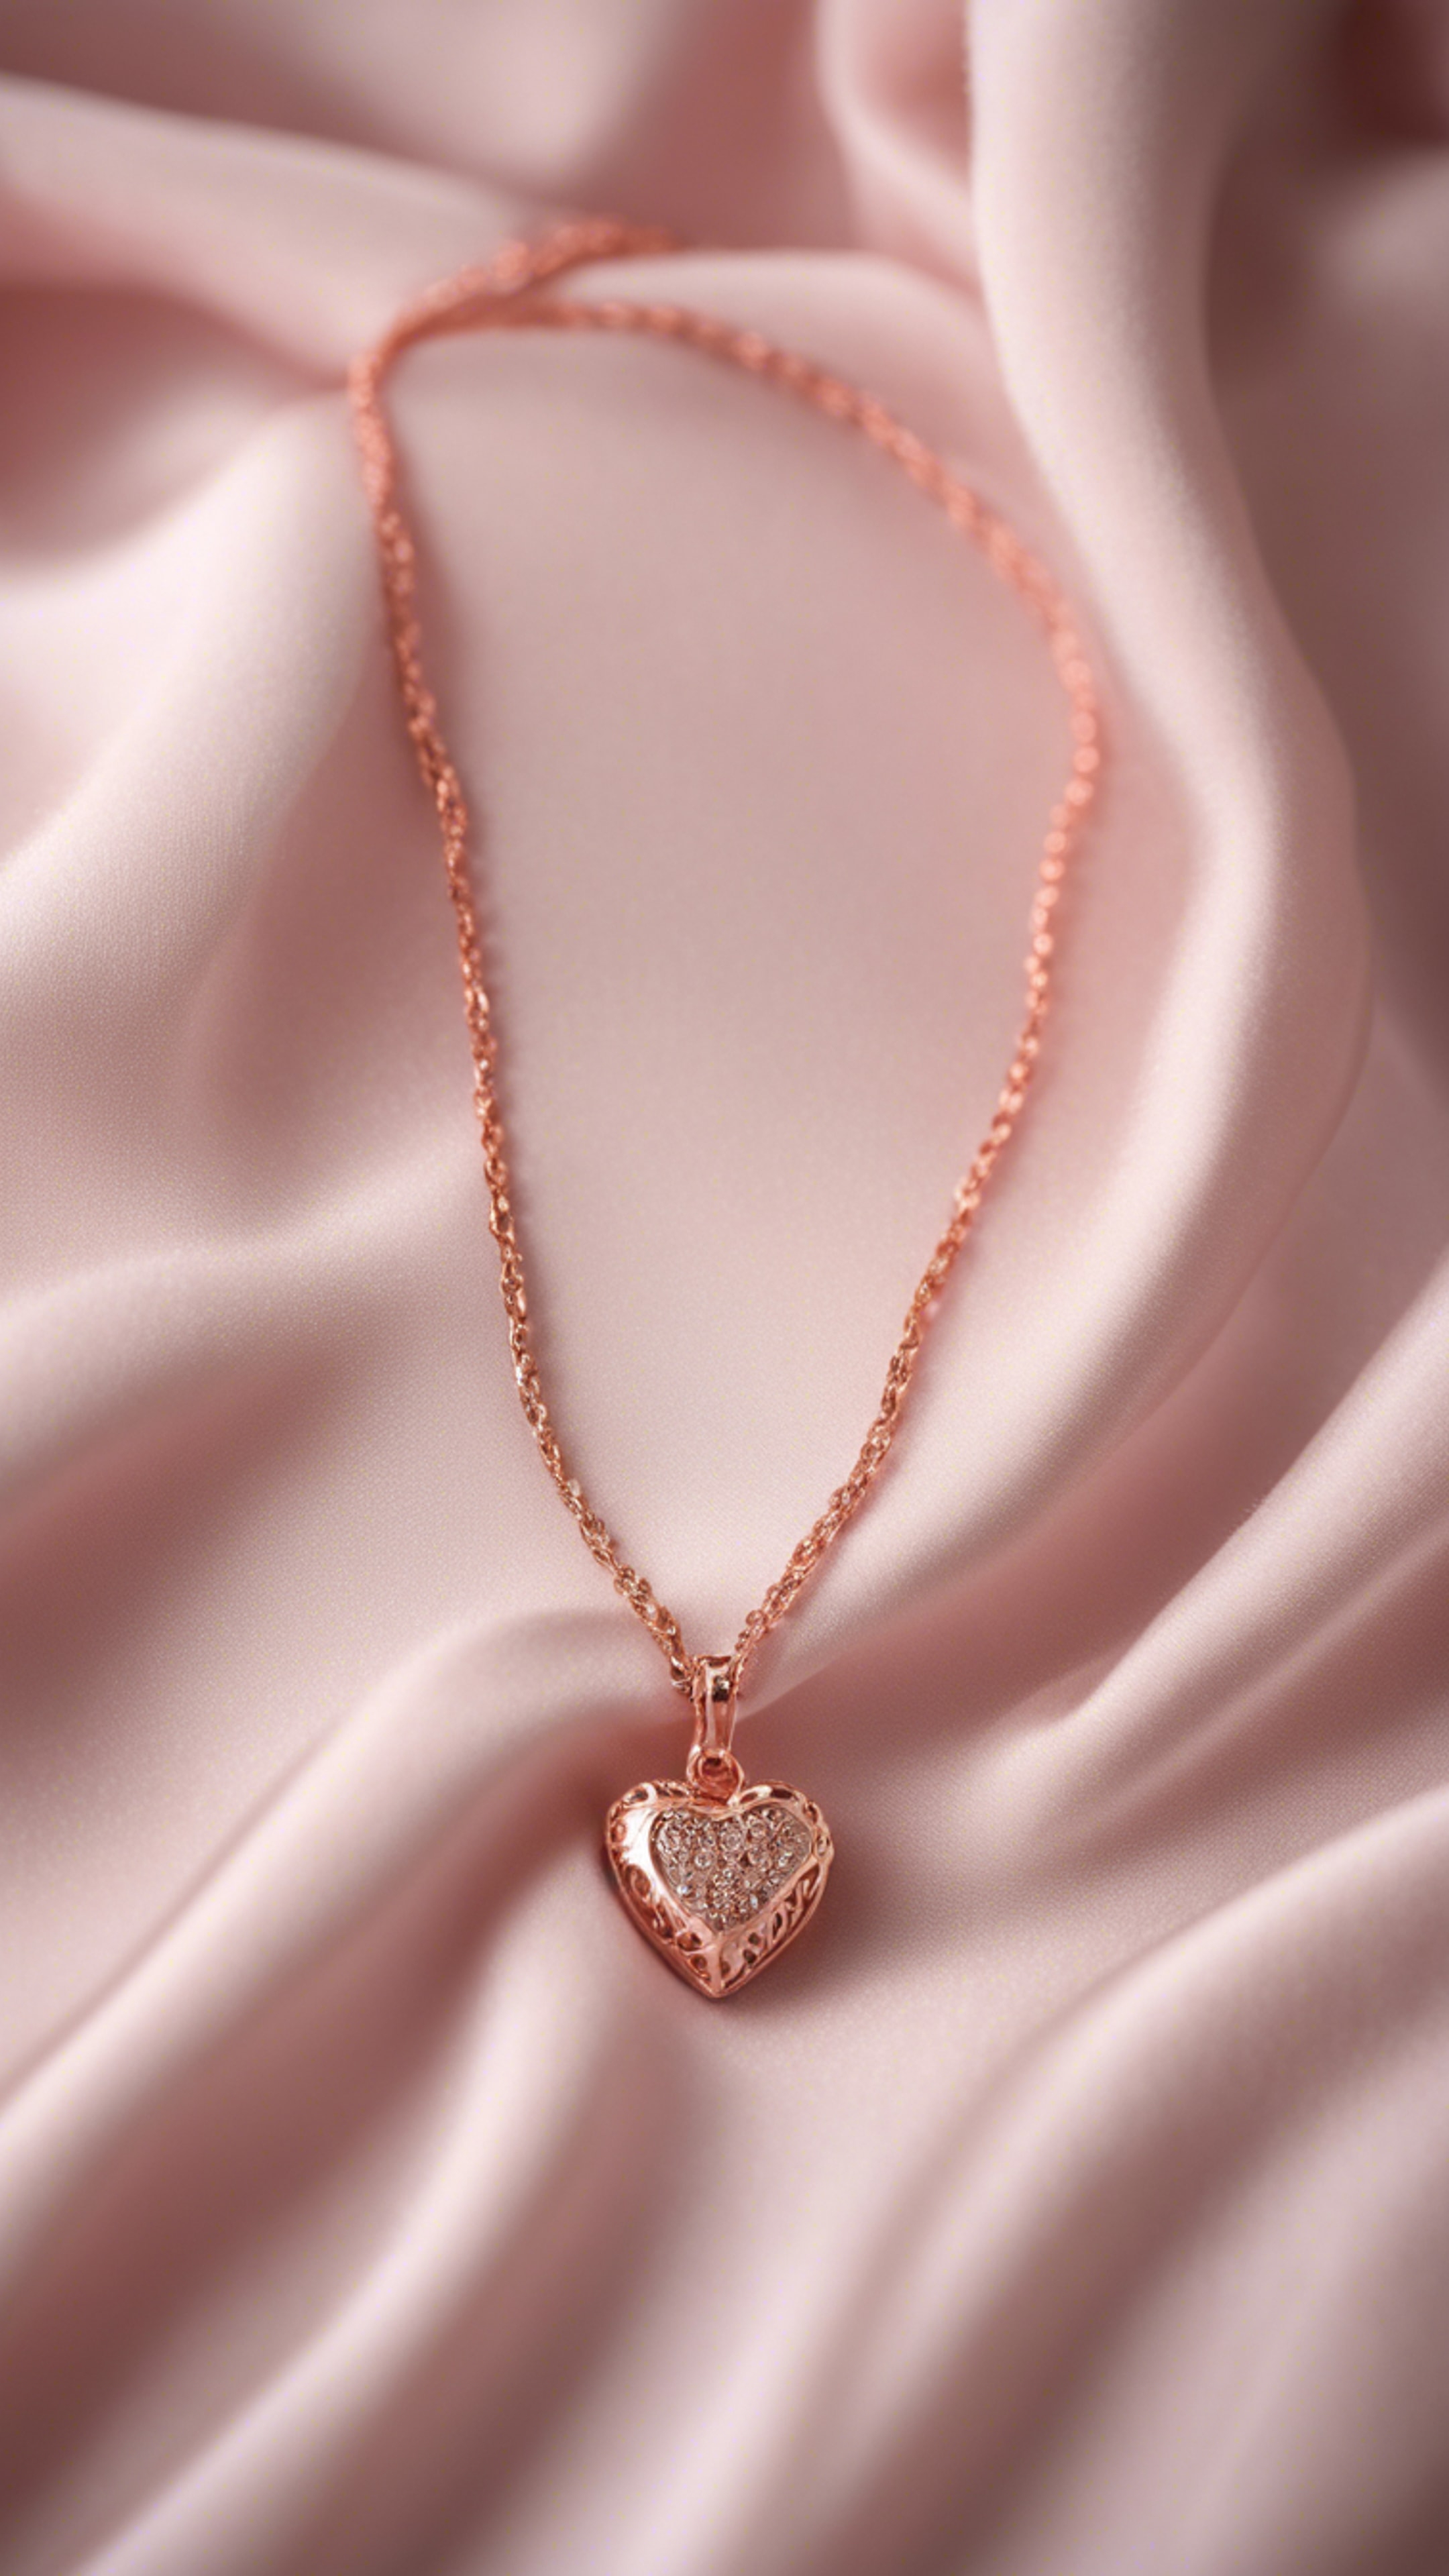 A delicate rose gold chain necklace with a small heart pendant, displayed on a soft pink satin fabric. ផ្ទាំង​រូបភាព[1bffd5f9a0f0499fae91]